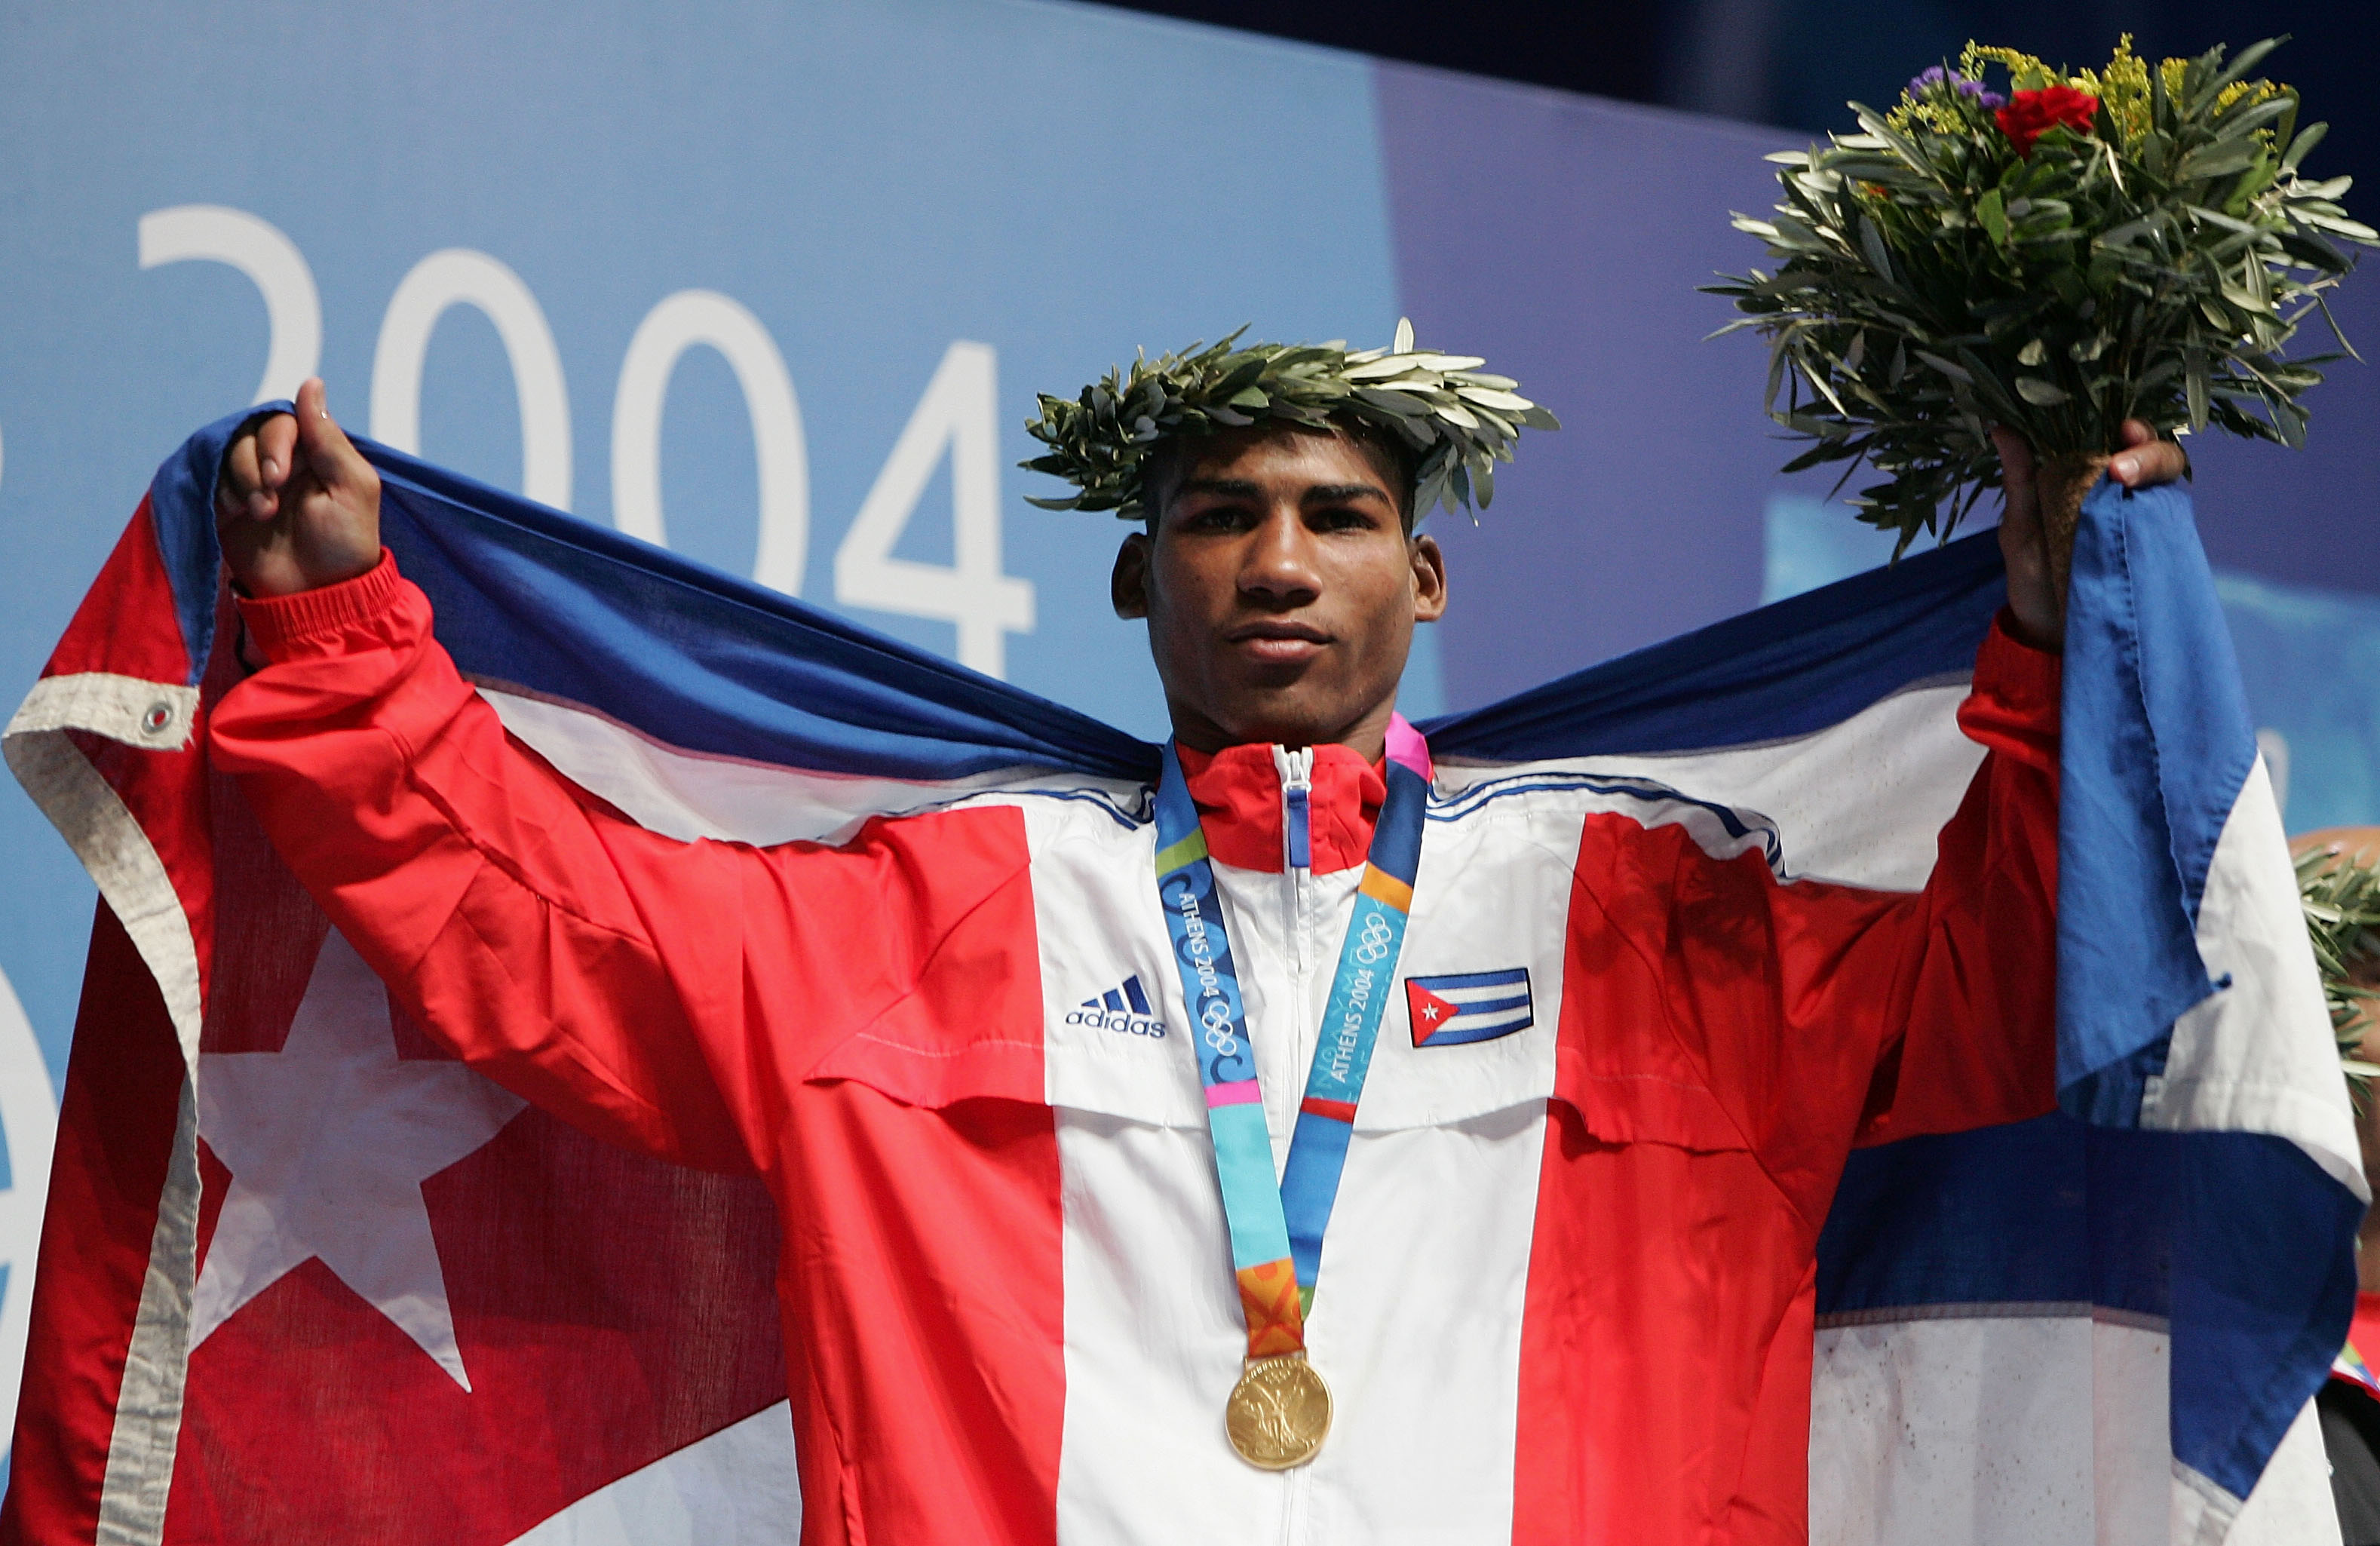 ATHENS - AUGUST 28:  Yuriorkis Gamboa Toledano of Cuba, Gold medalist in the men's boxing 51 kg event on August 28, 2004 during the Athens 2004 Summer Olympic Games at Peristeri Olympic Boxing Hall in Athens, Greece. (Photo by Al Bello/Getty Images)